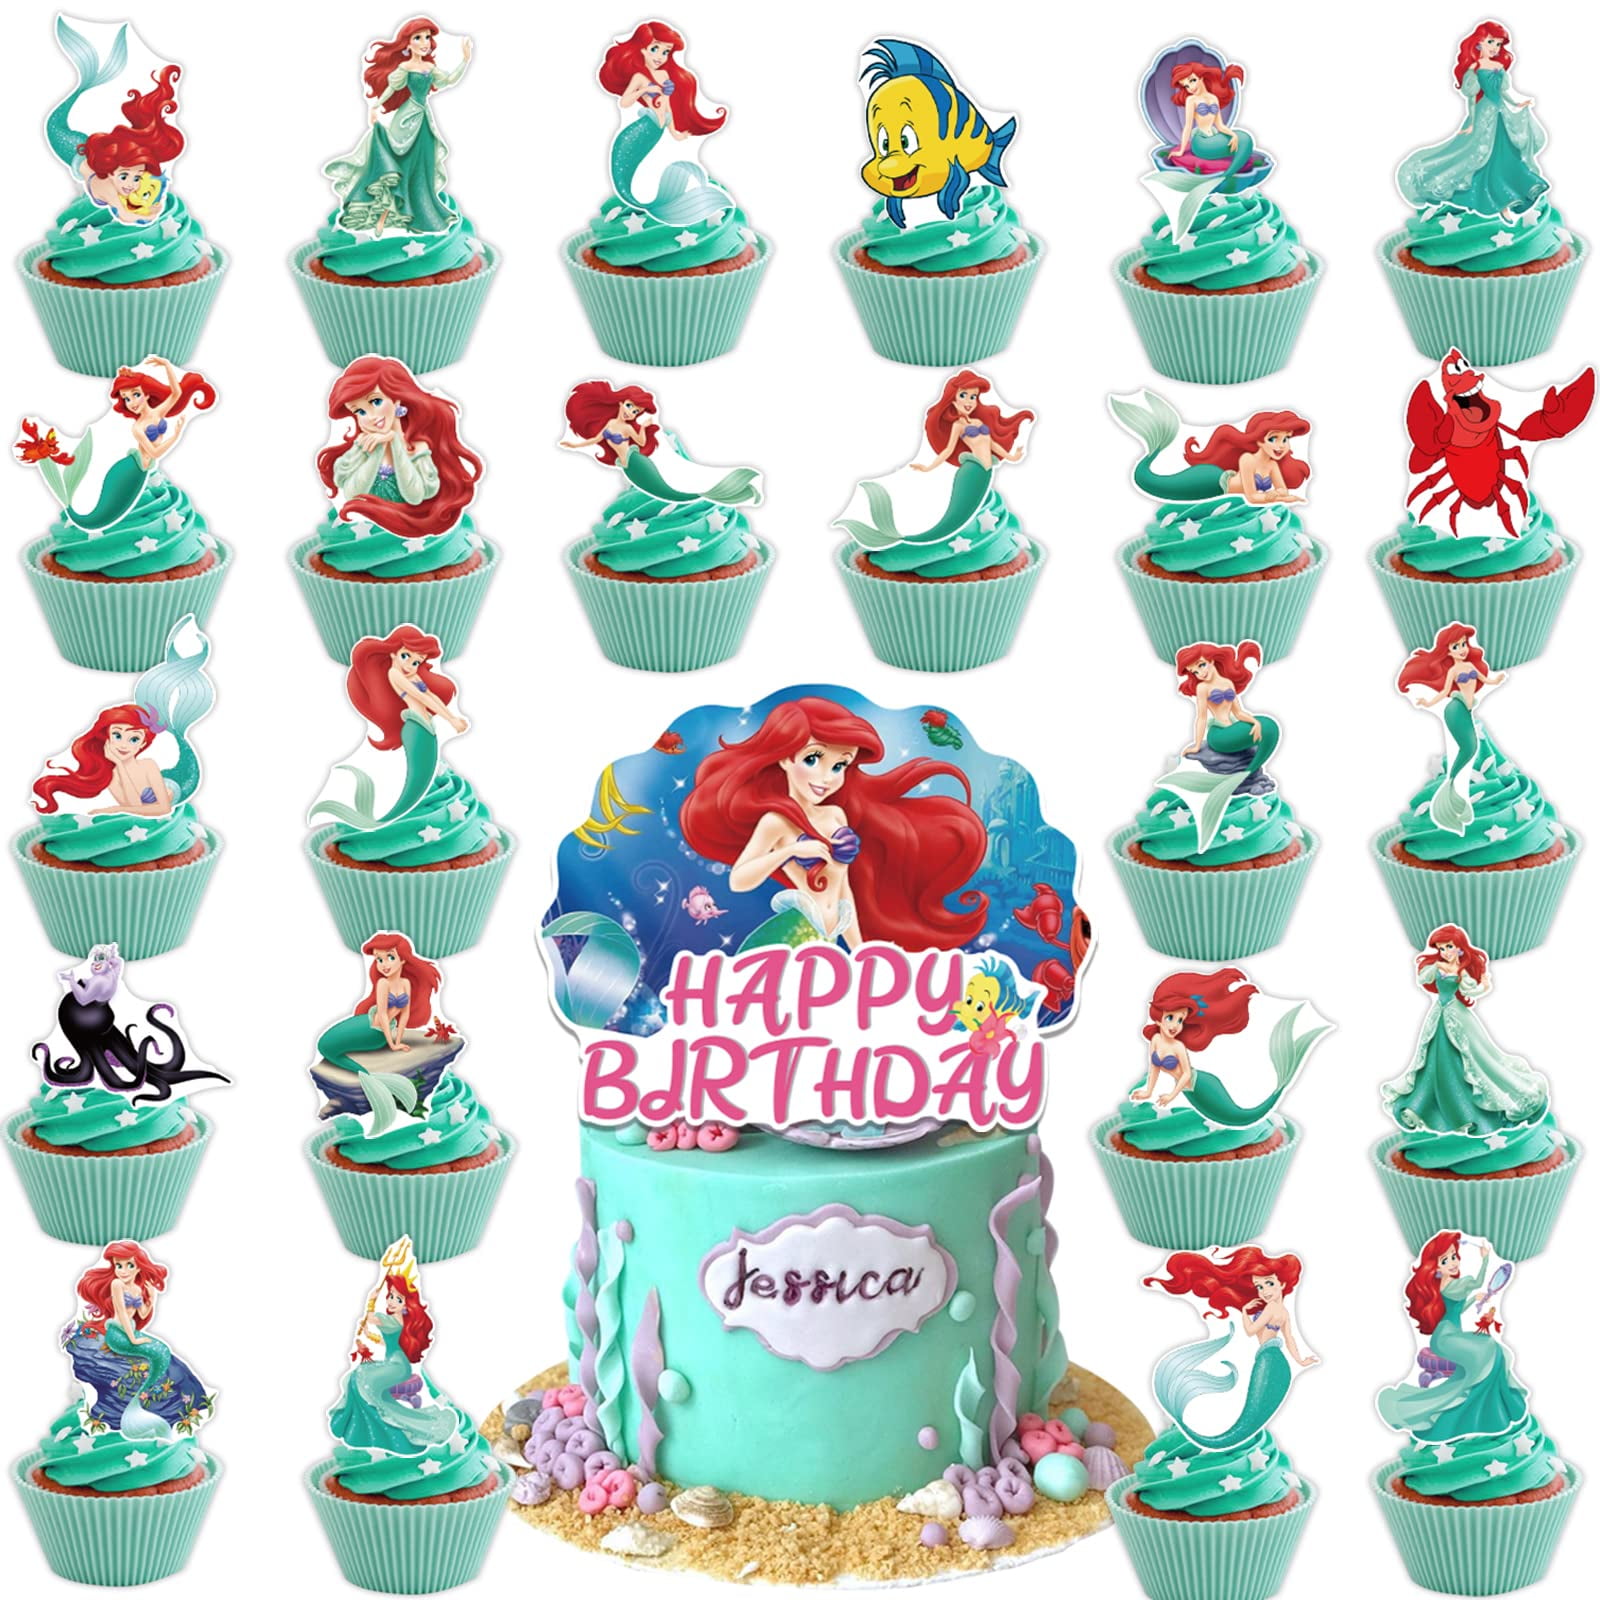 Little Mermaid Cake Design - How to Make | Decorated Treats